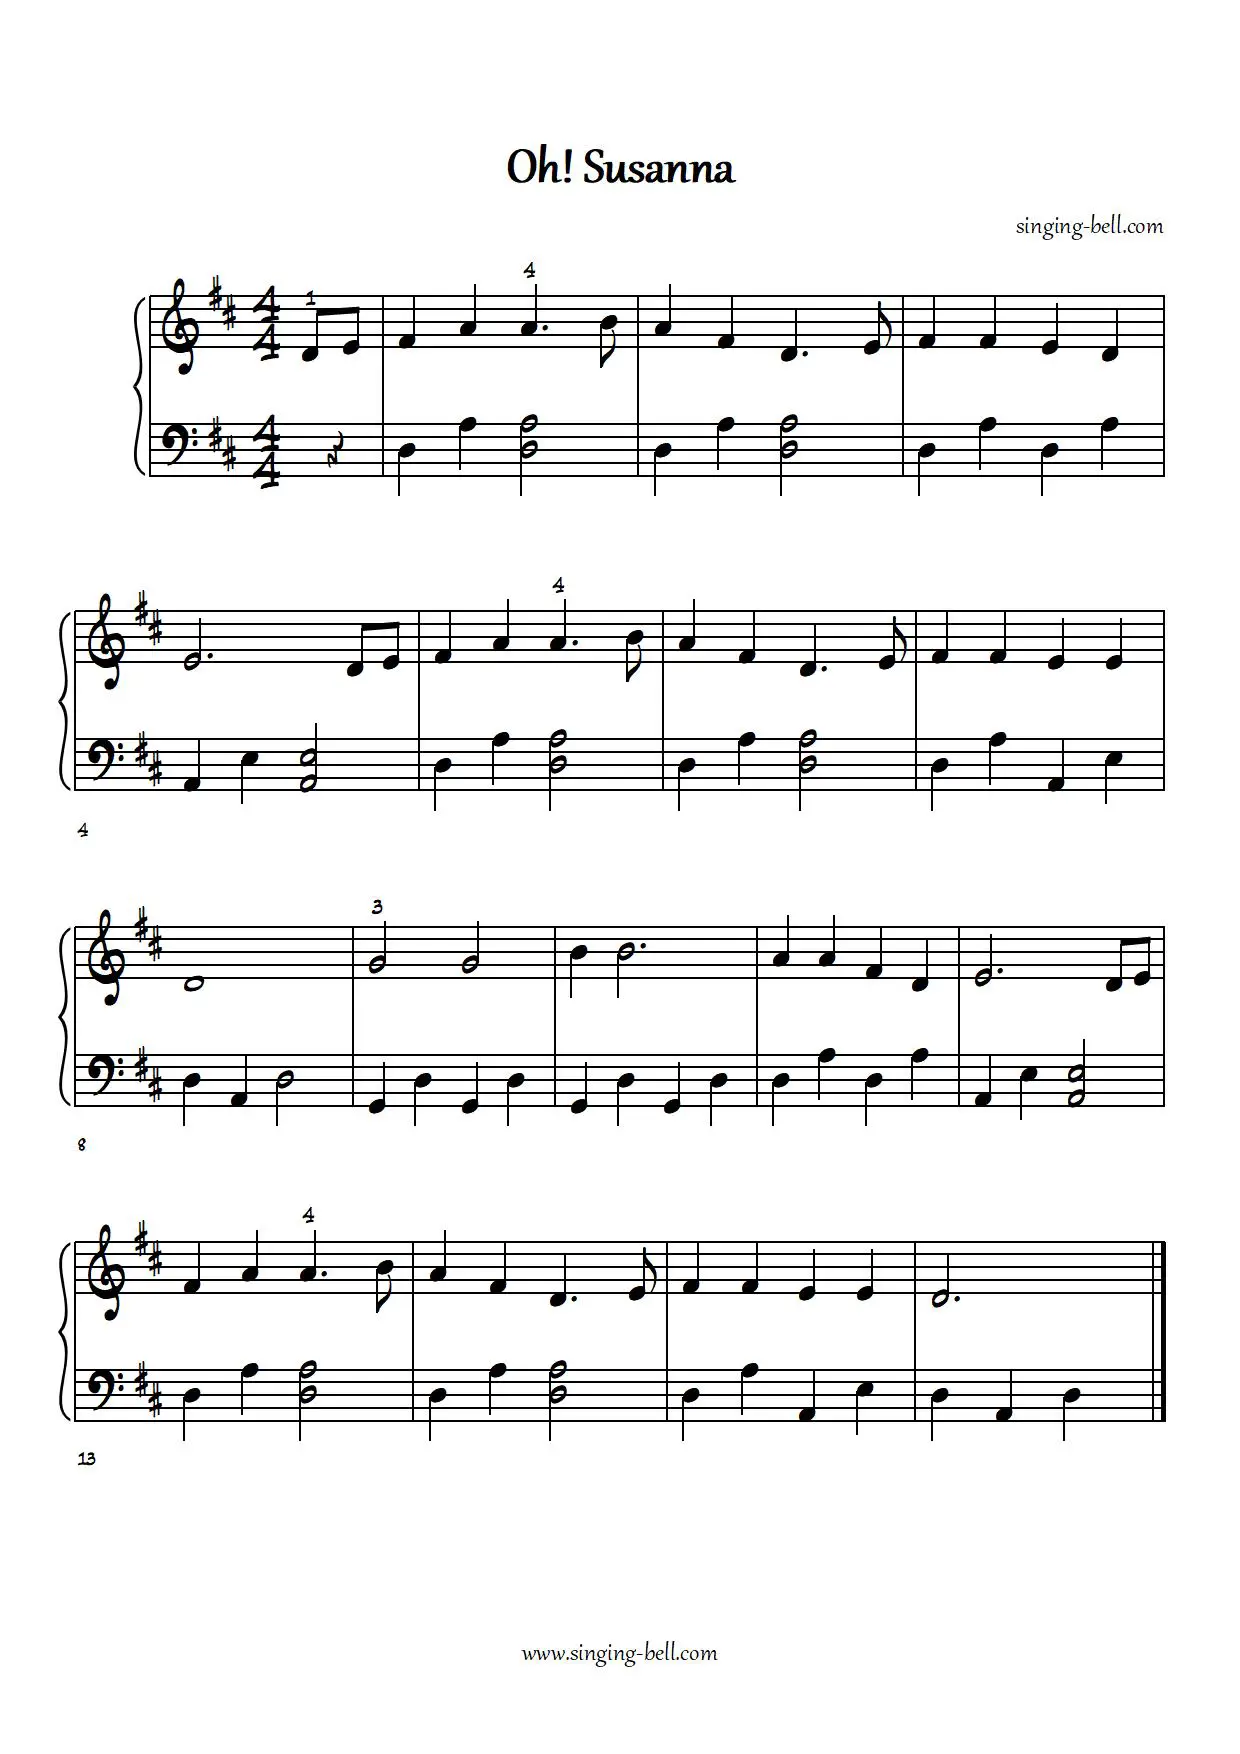 Oh Susanna easy piano sheet music notes chords beginners pdf